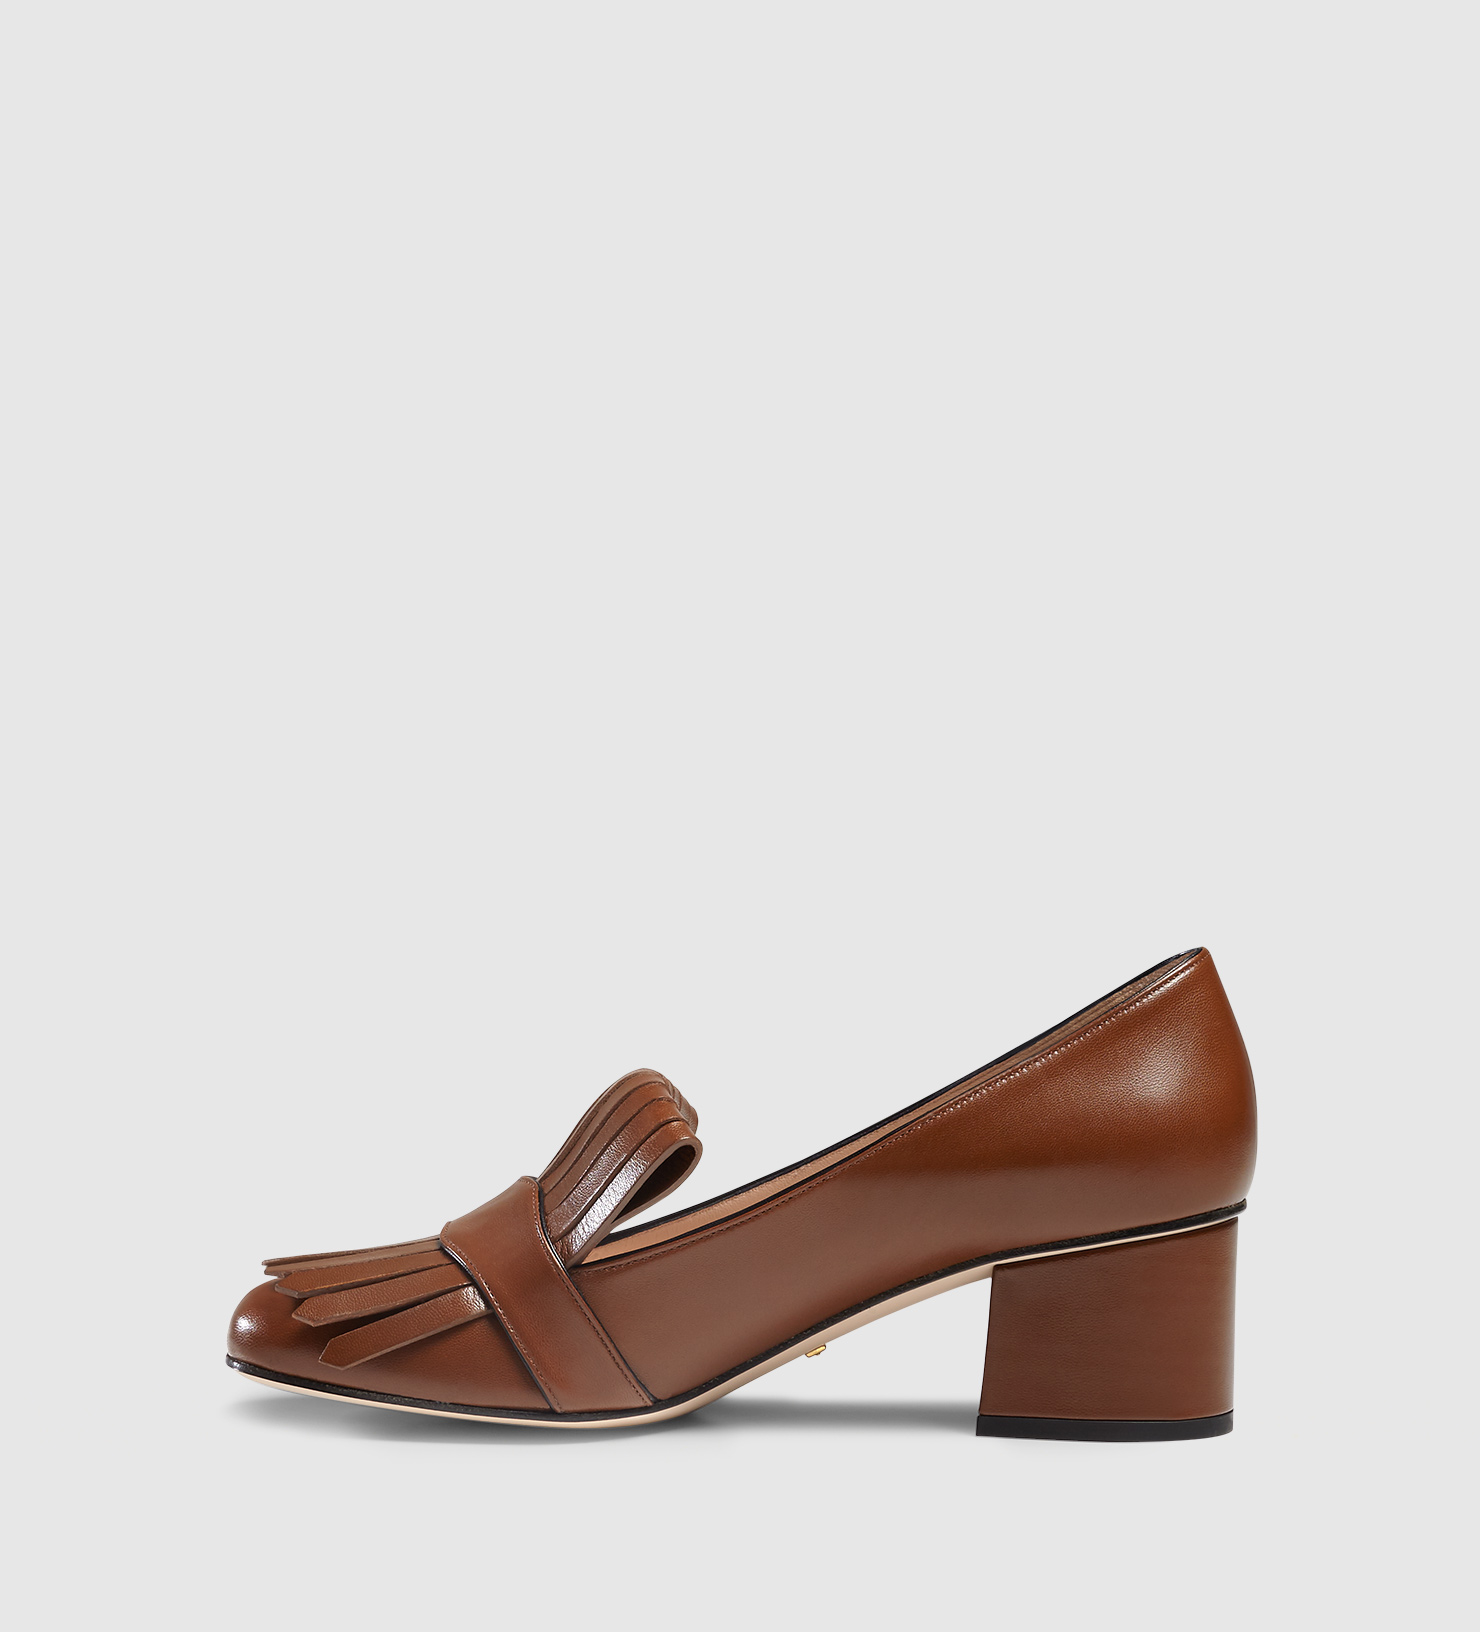 Lyst - Gucci Leather Mid-heel Pump in Brown